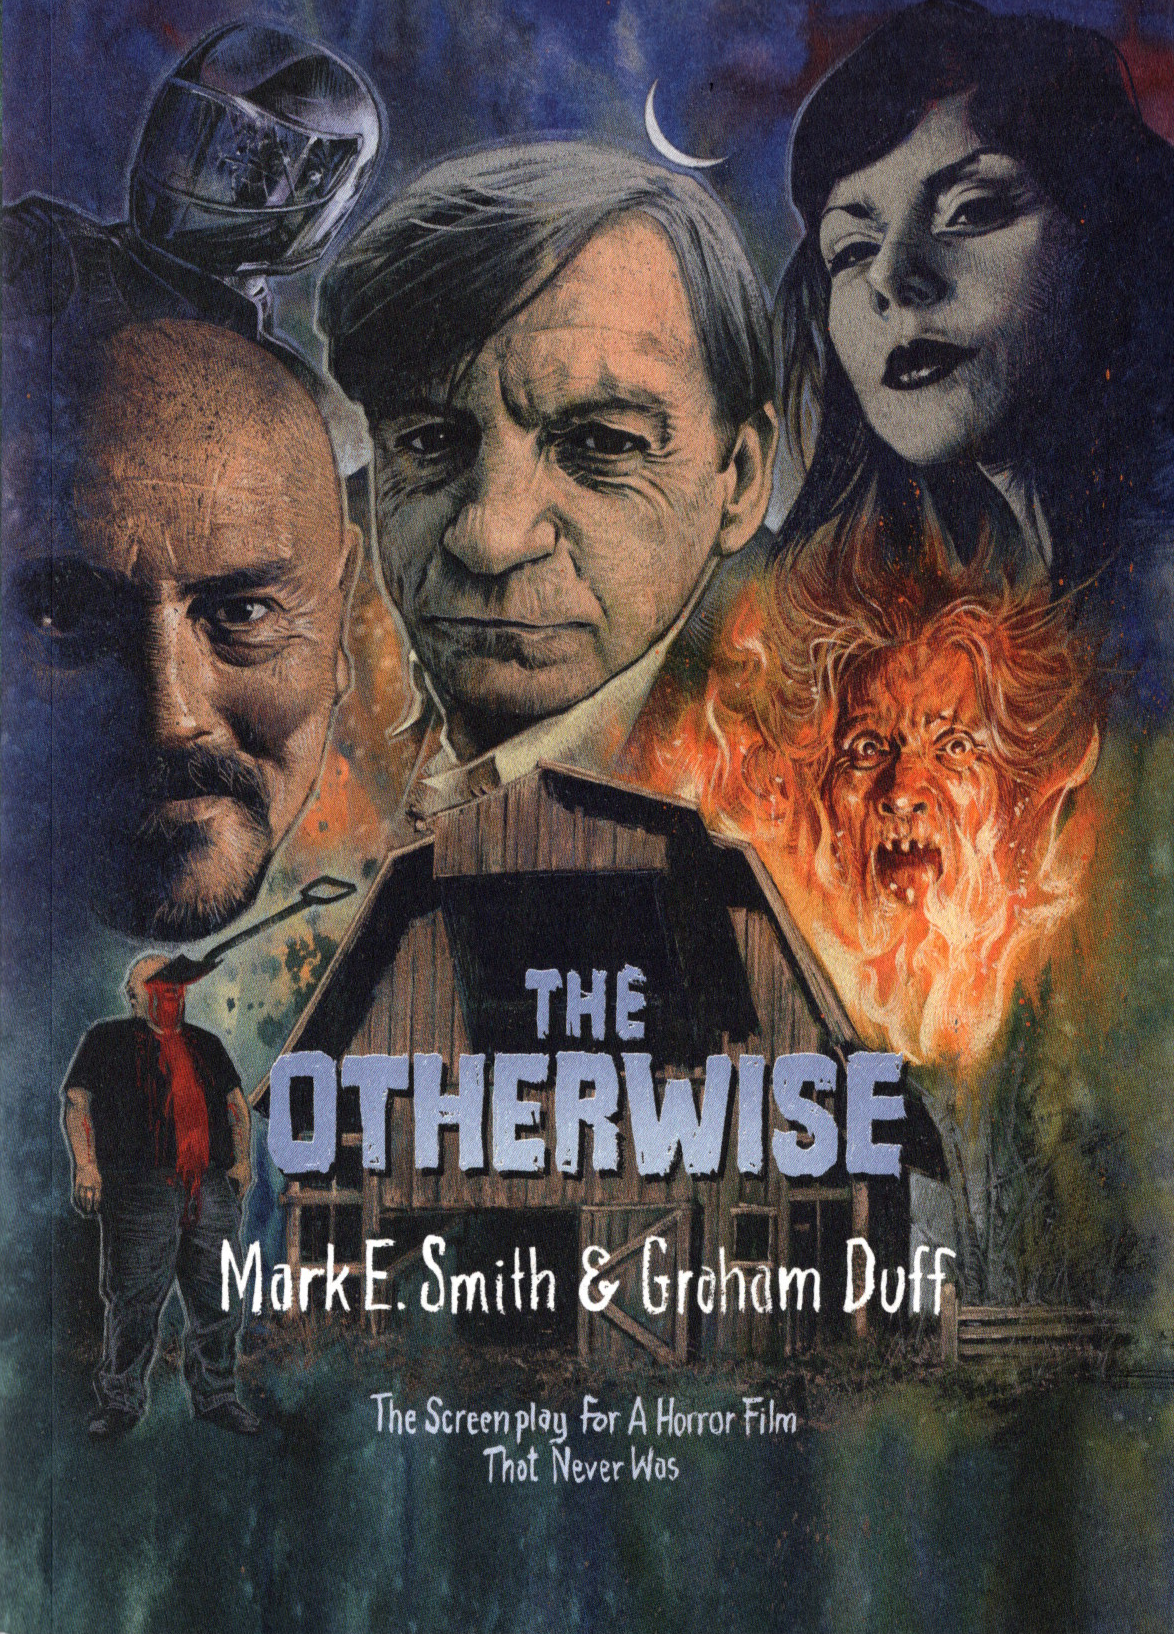 The Otherwise, Mark E. Smith and Graham Duff